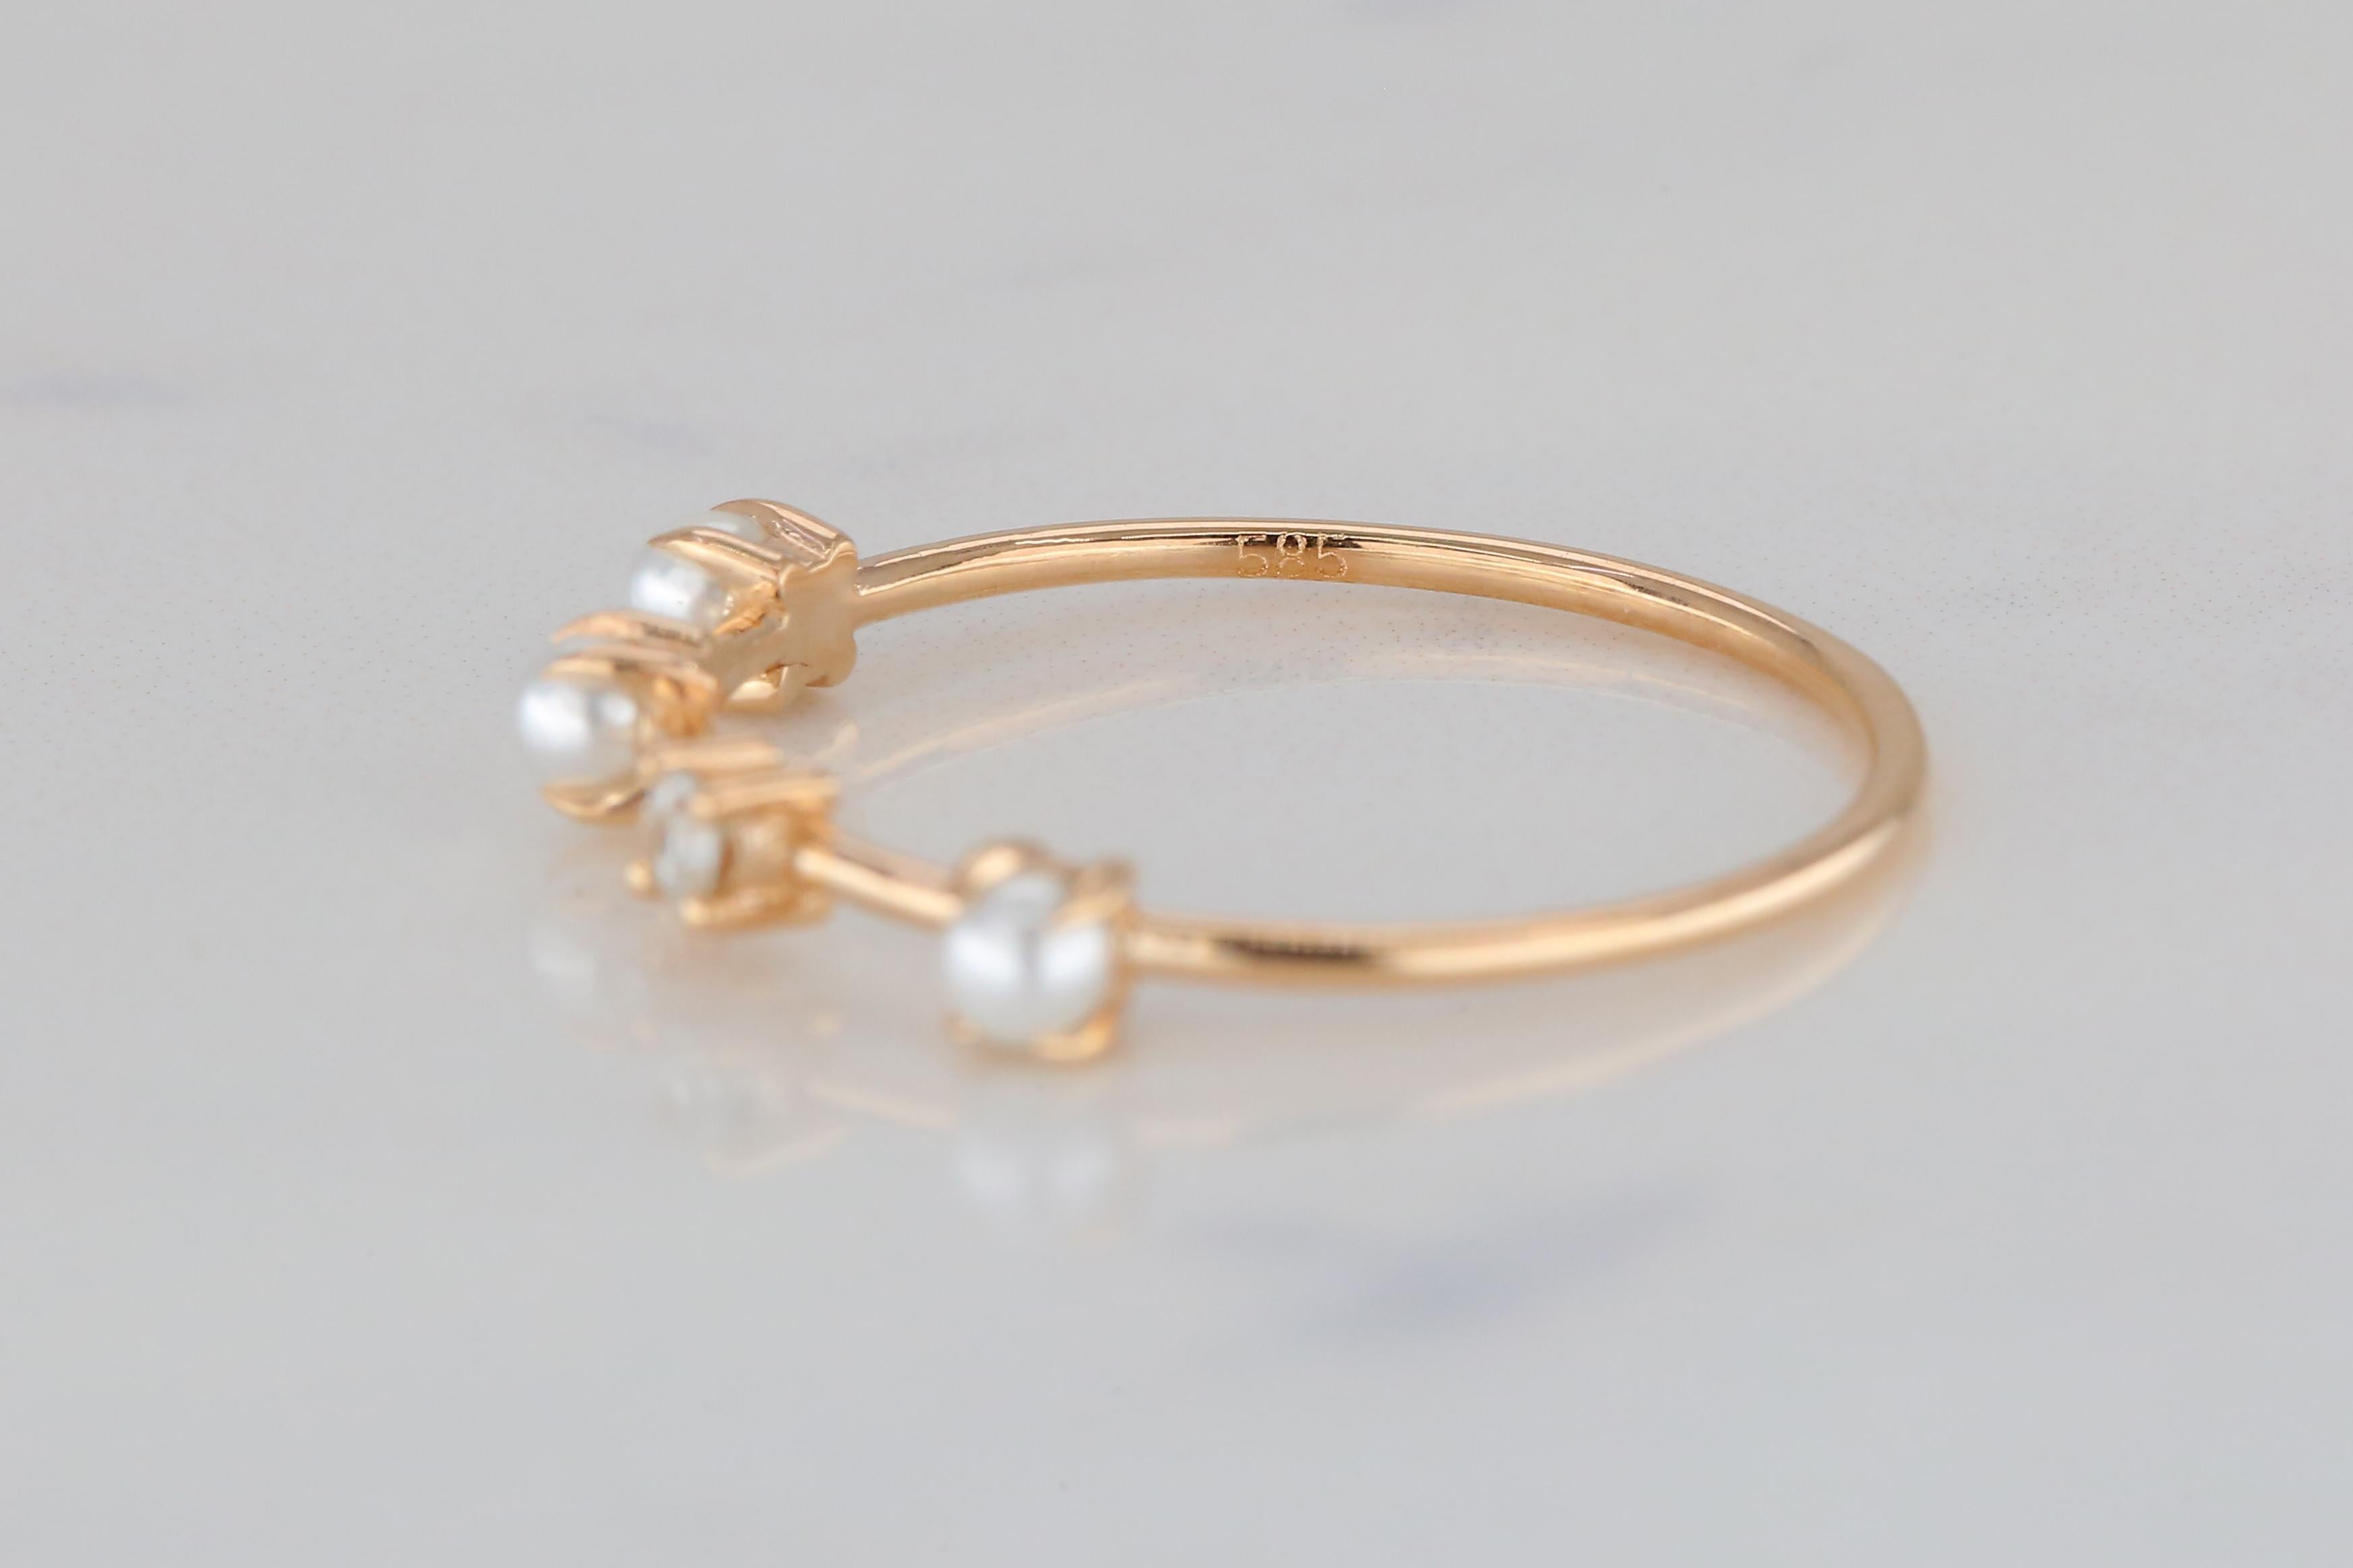 For Sale:  Three Pearl and Diamond Ring, 14K Gold Pearl Ring, Minimalist Style Ring 9